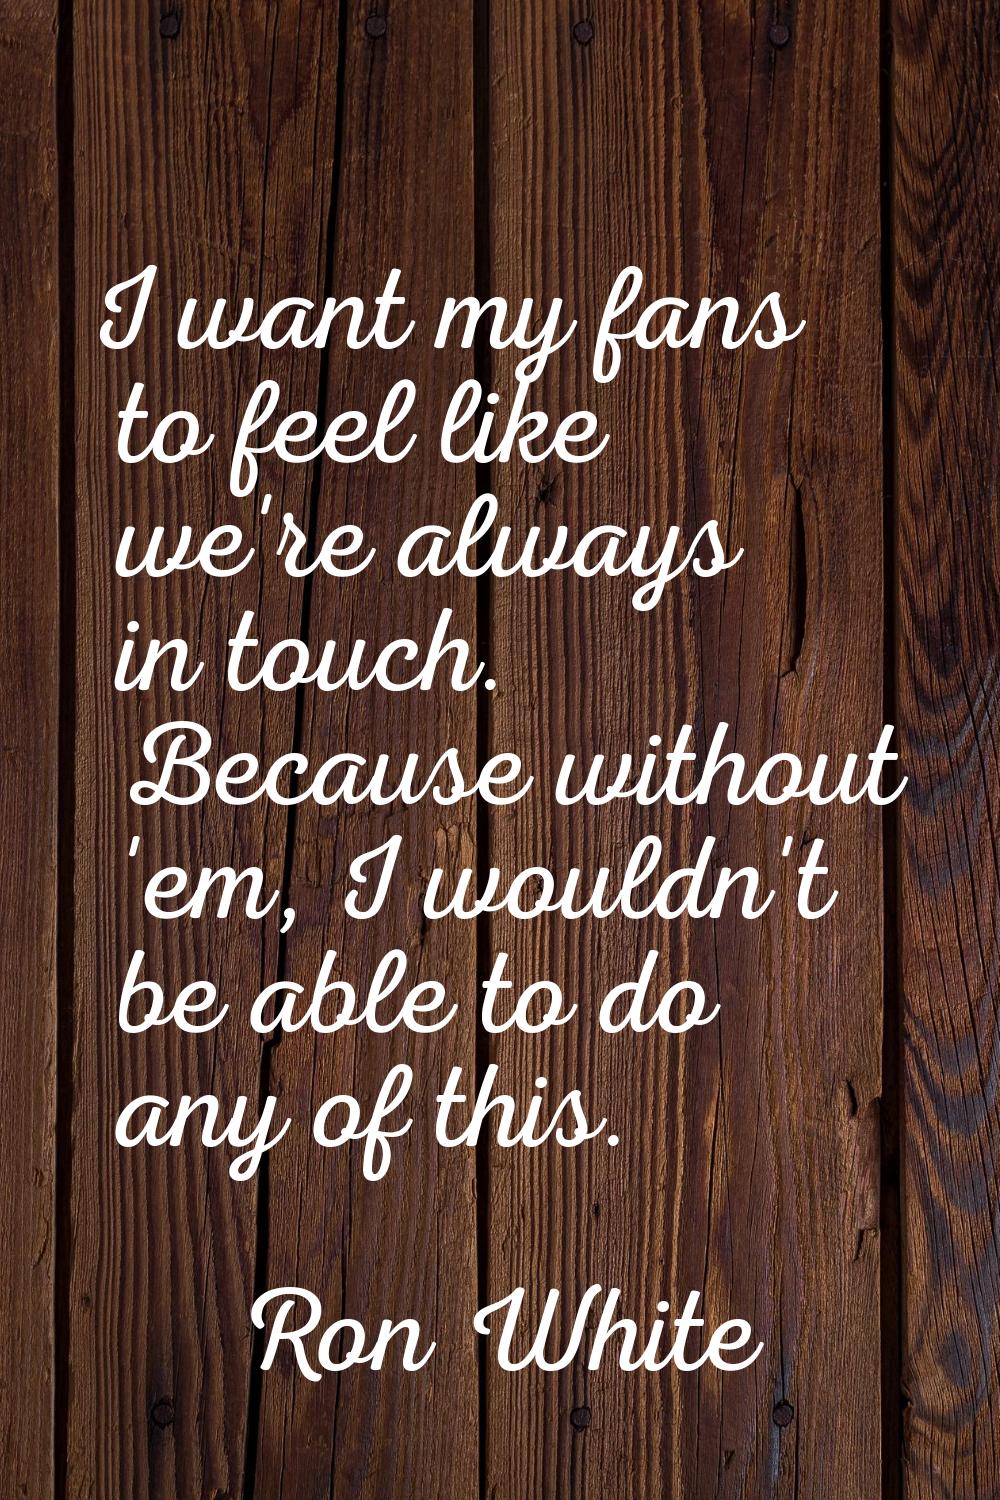 I want my fans to feel like we're always in touch. Because without 'em, I wouldn't be able to do an